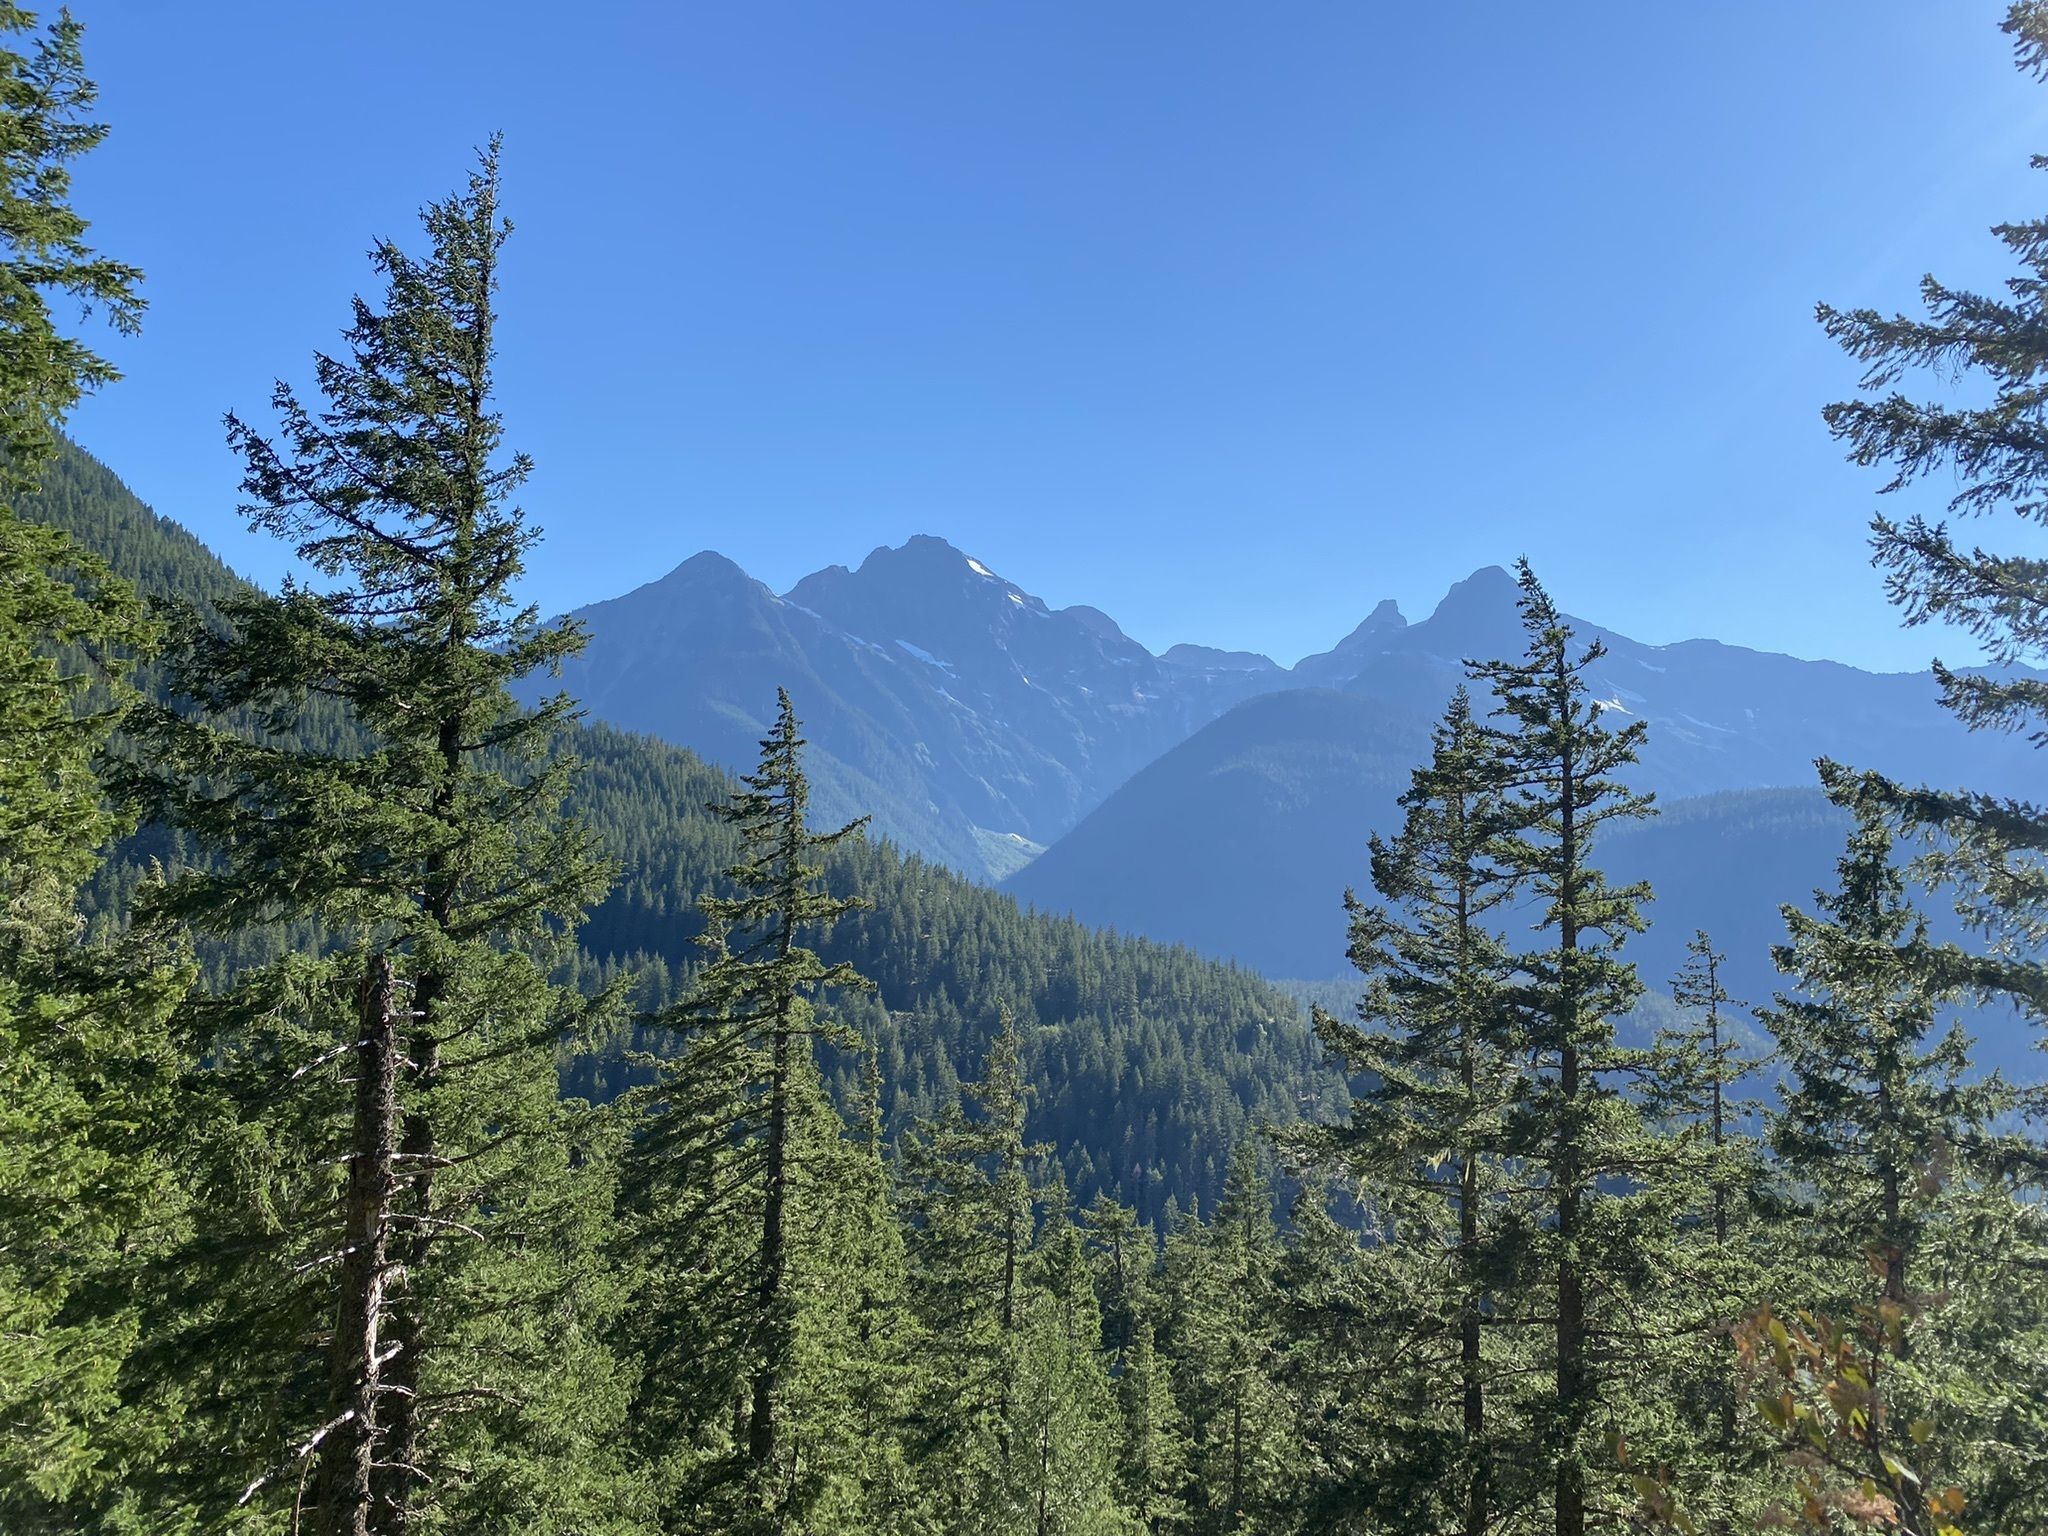  Camping in the North Cascades like at Colonial Creek South Campground will put you near some of the best hiking trailheads